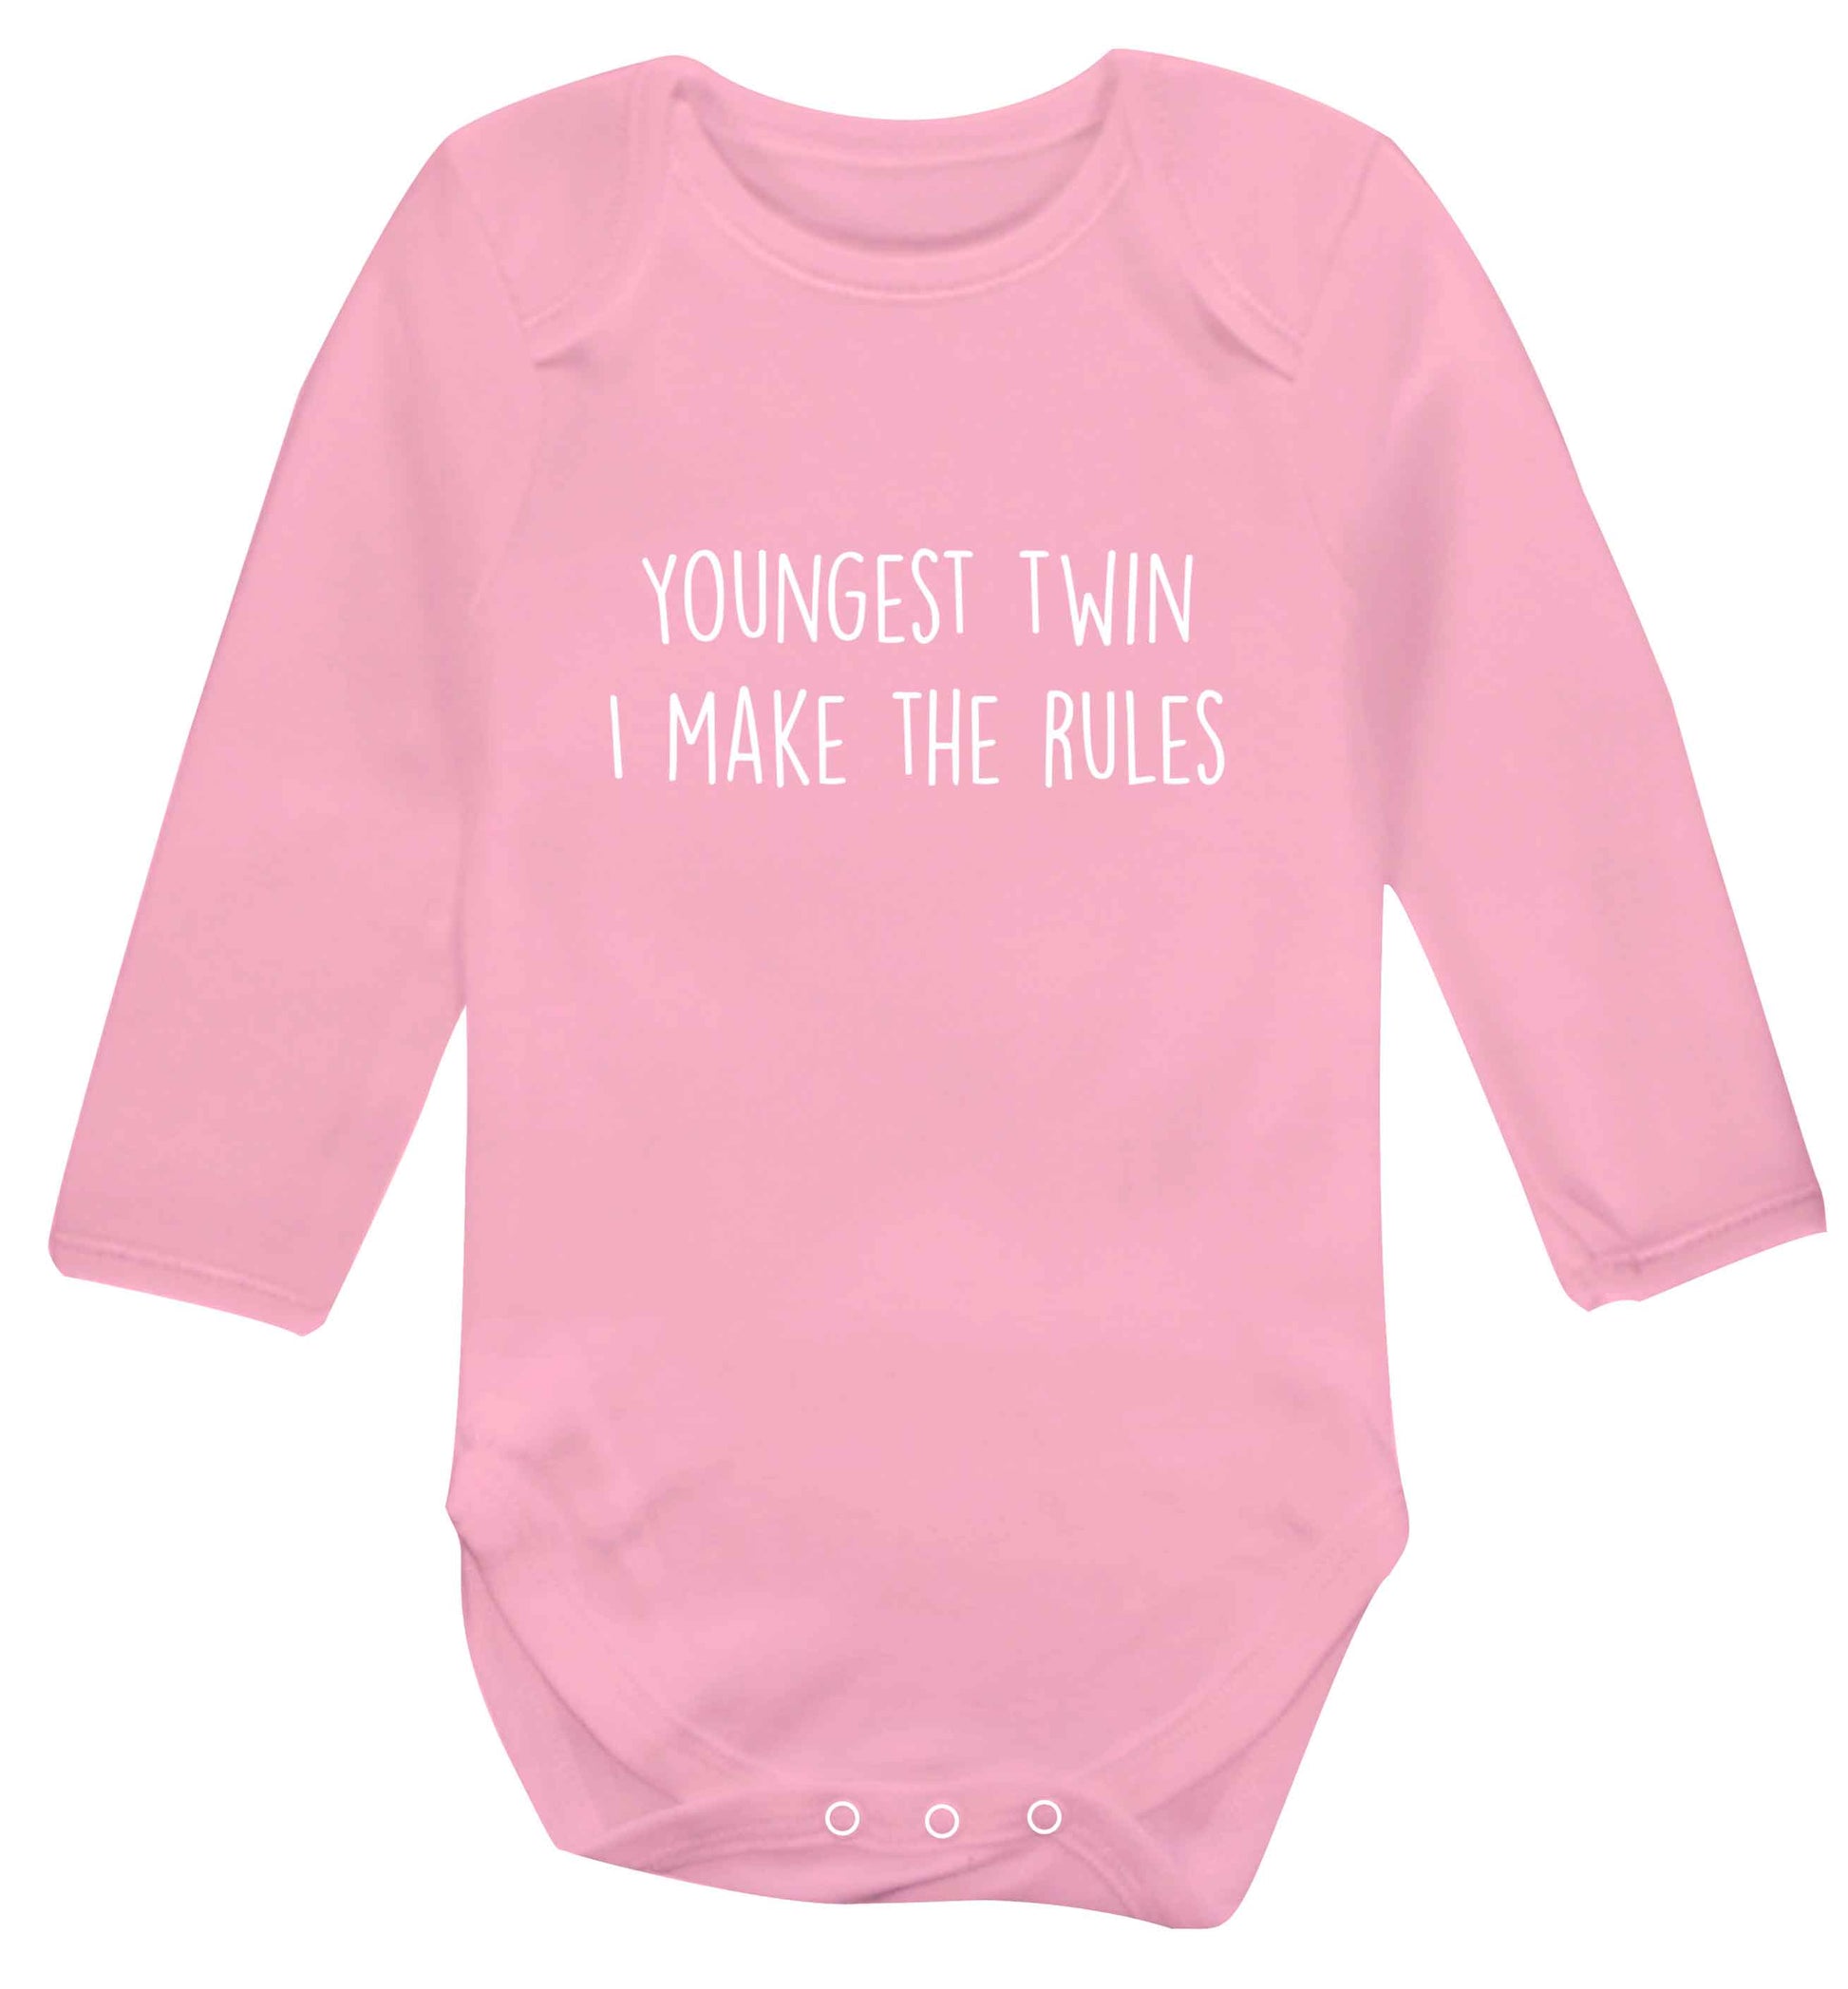 Youngest twin I make the rules baby vest long sleeved pale pink 6-12 months